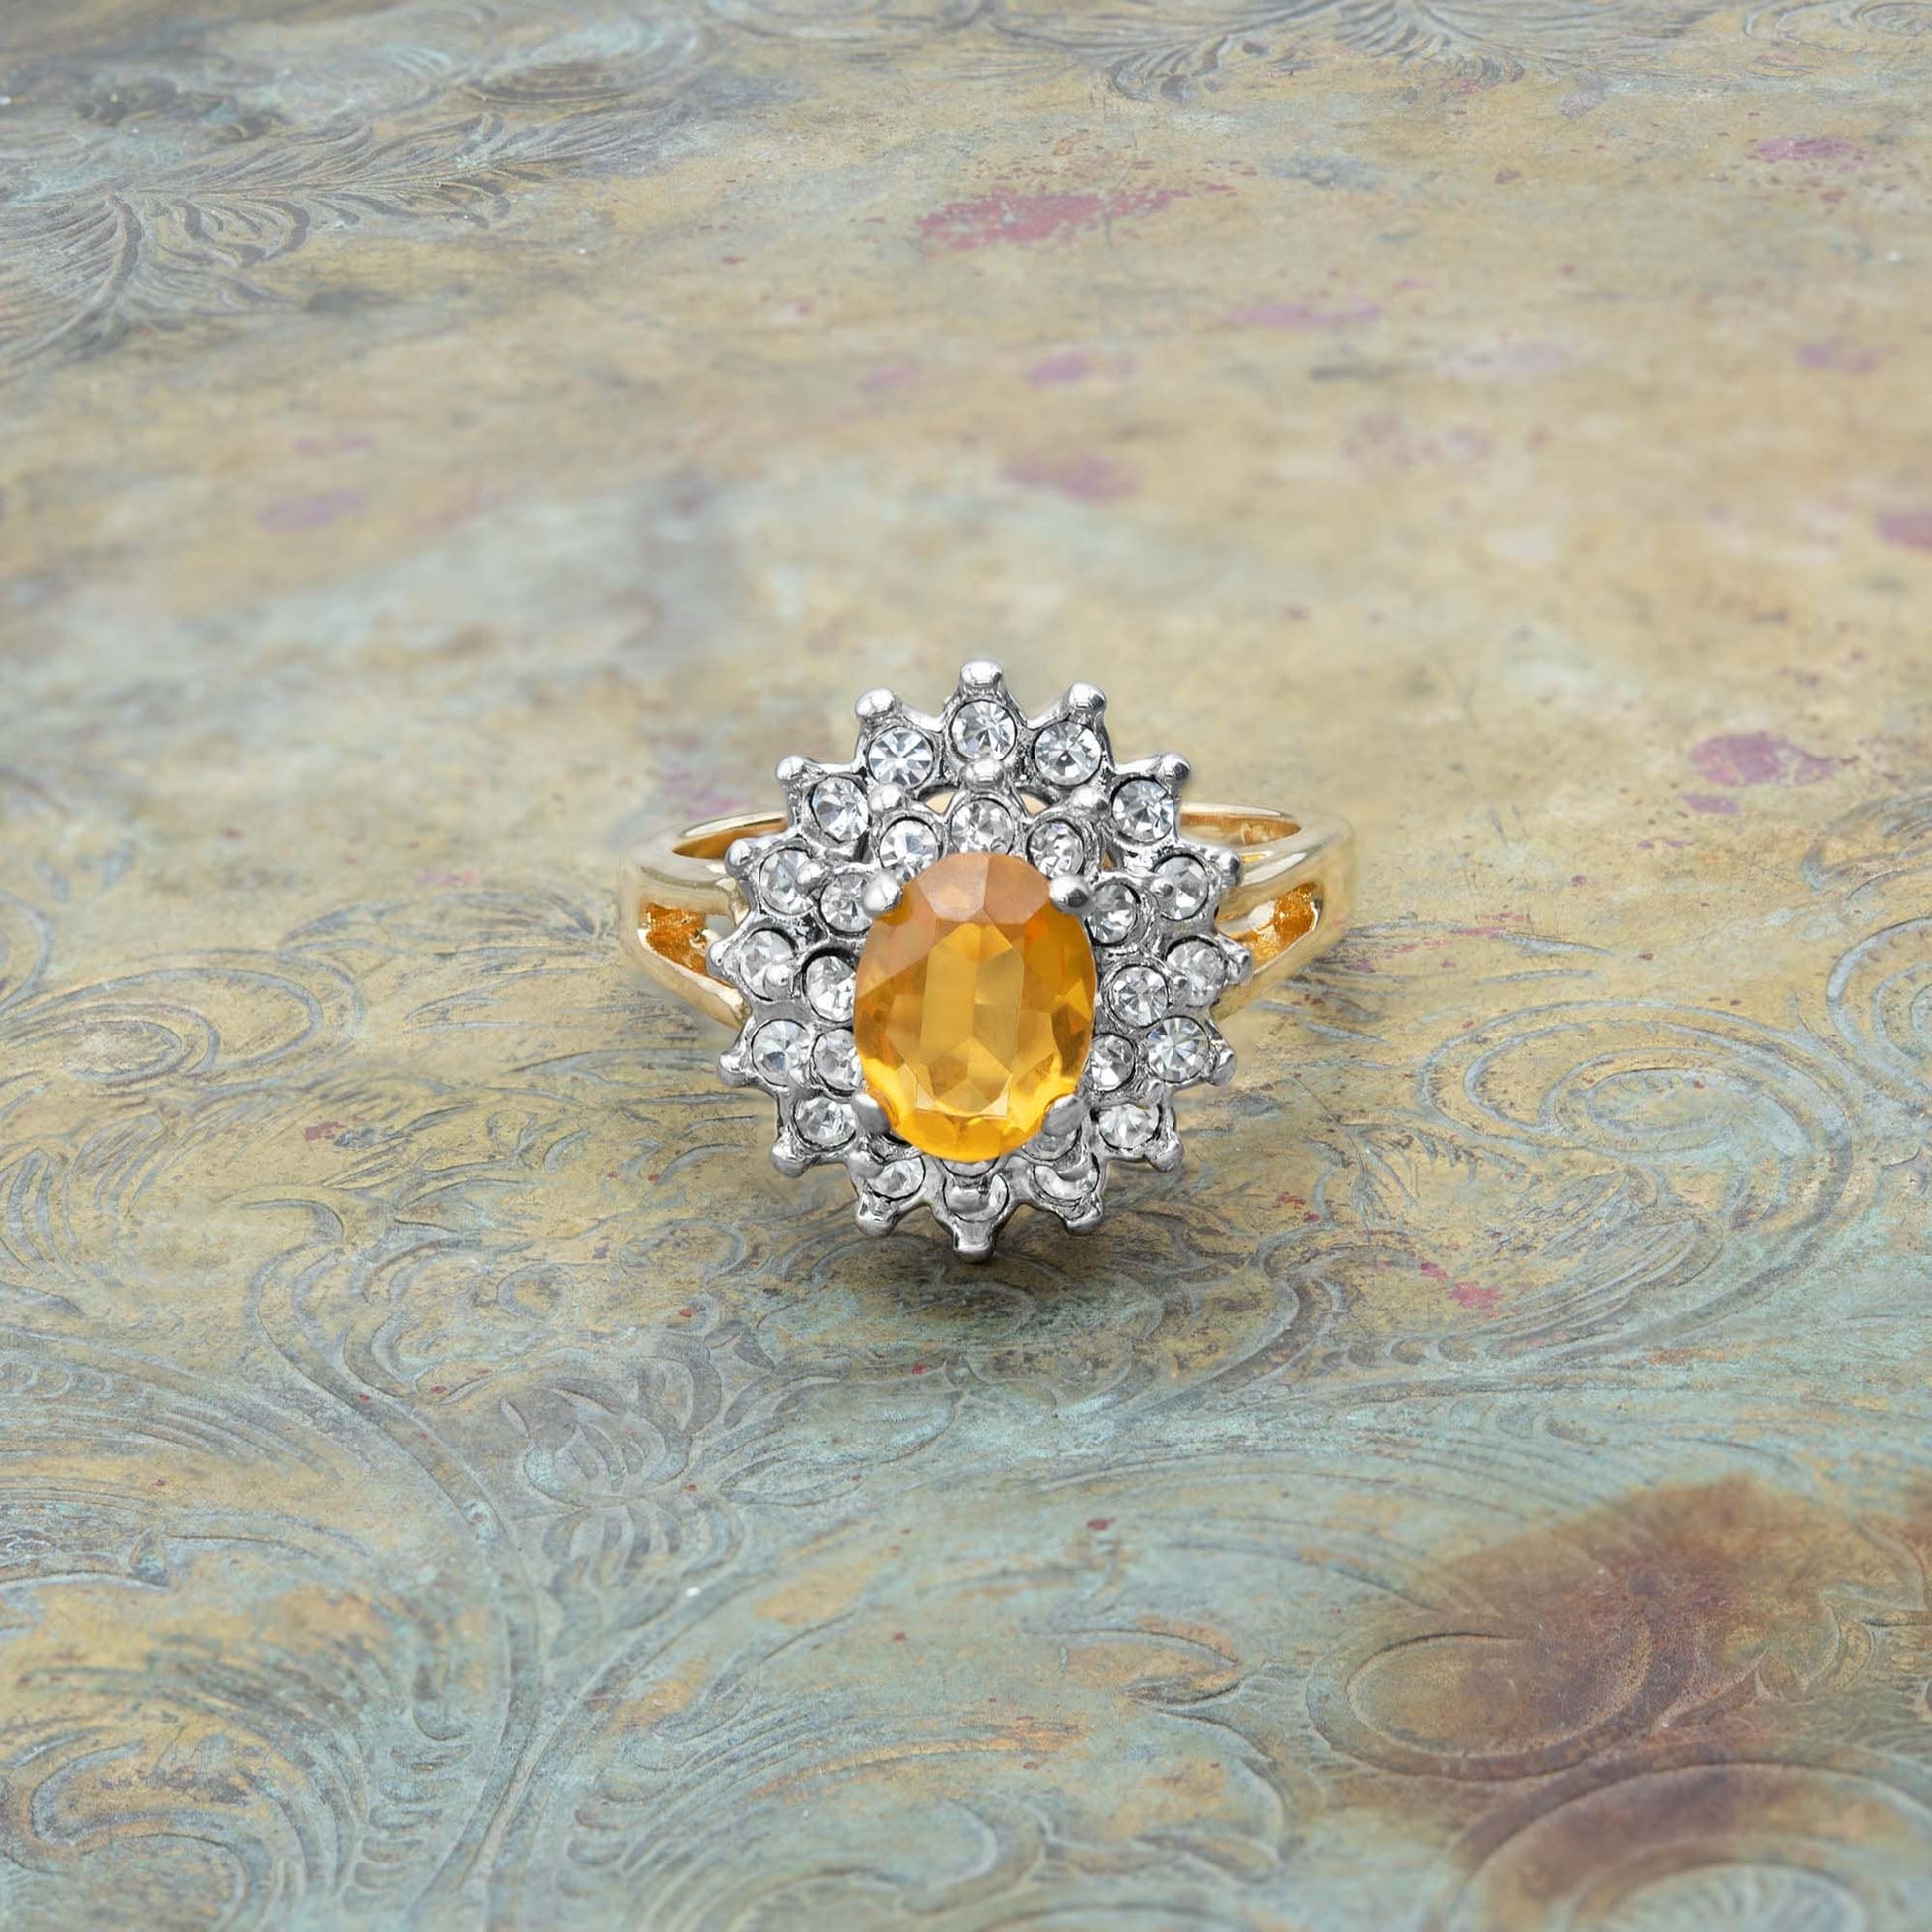 Vintage Ring Light Topaz and Clear Swarovski Crystals 18k Gold Cocktail Ring Antique Topaz Jewelry #R1352 - Limited Stock - Never Worn